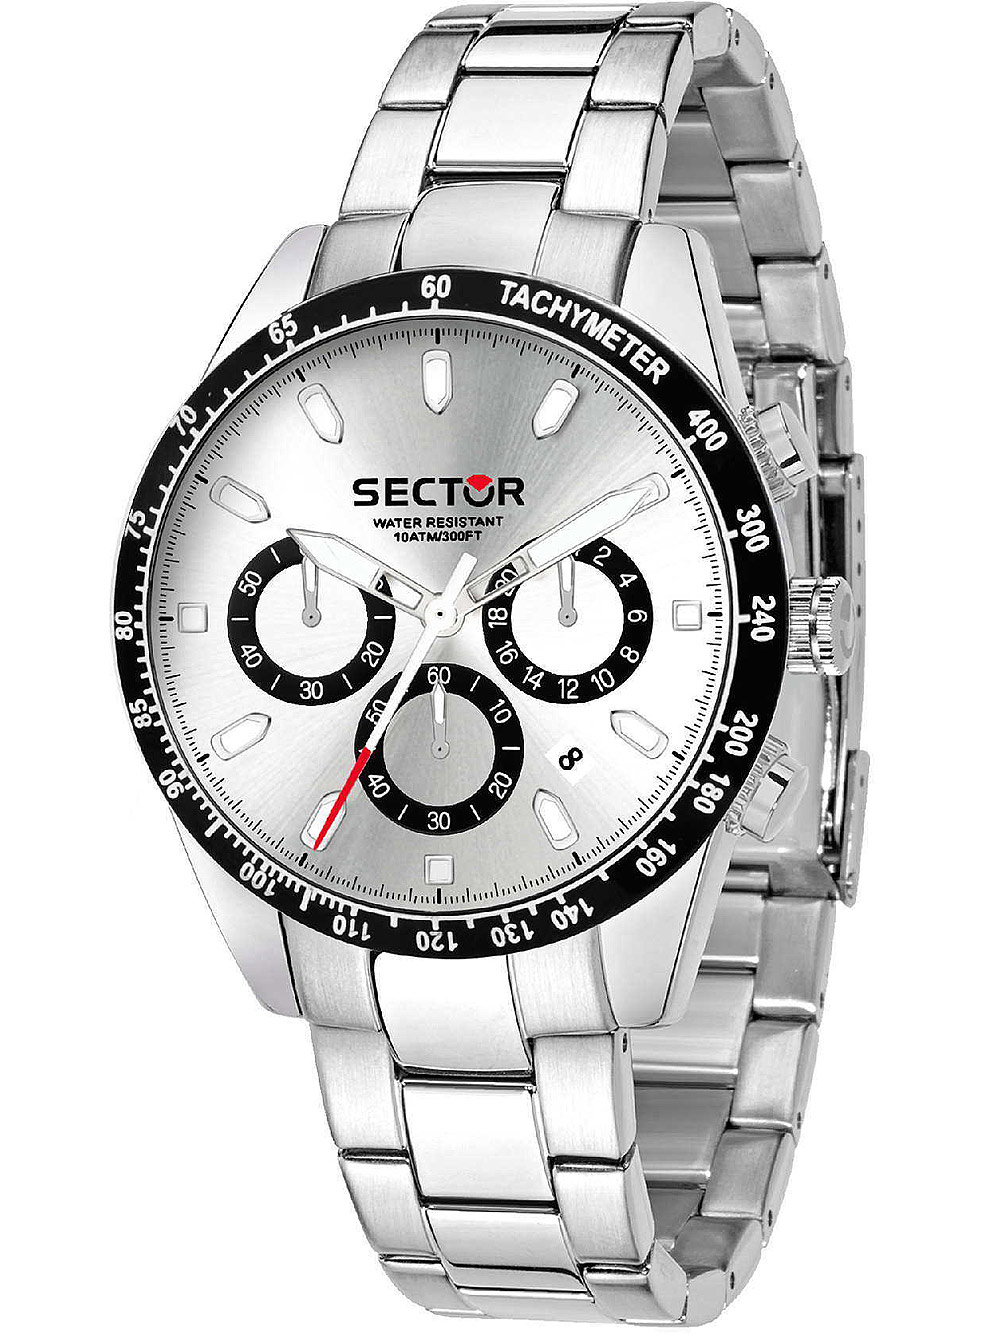 Sector R3273786005 Serie 245 Chronograph 41mm 10ATM